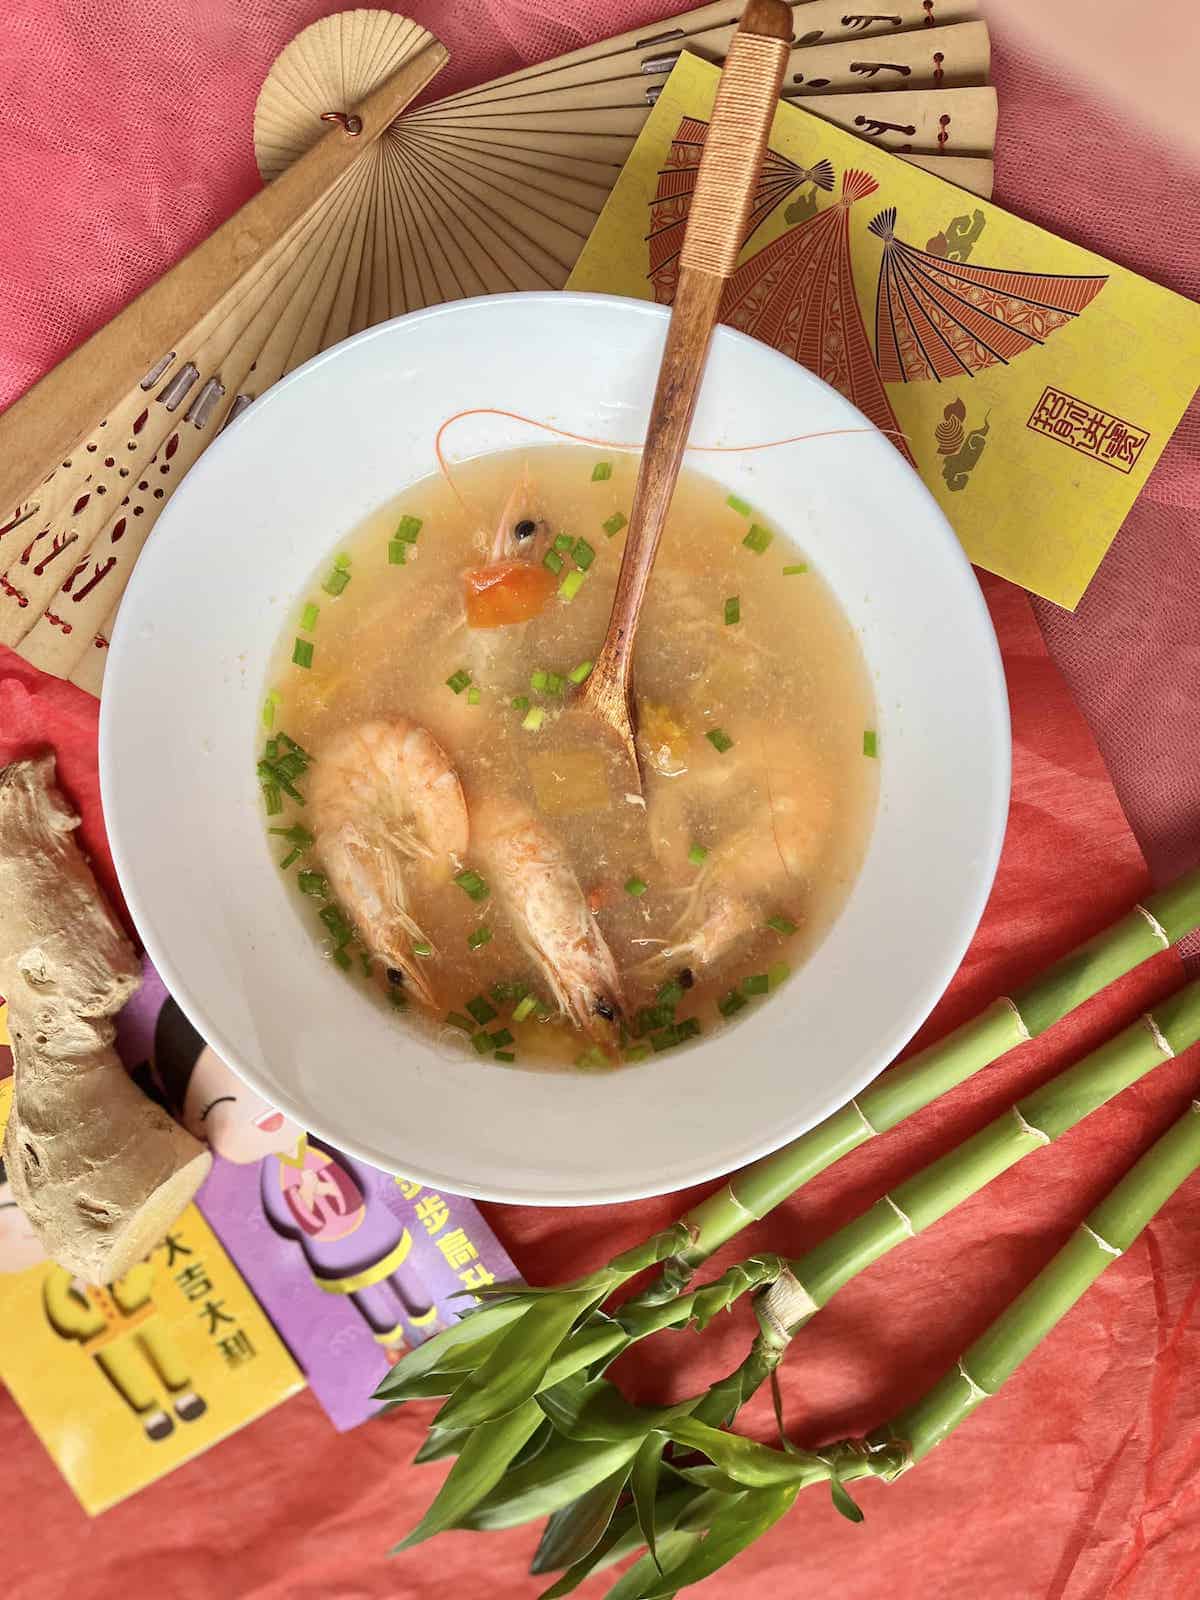 A bowl of Lemongrass soup with shrimp and green onions.